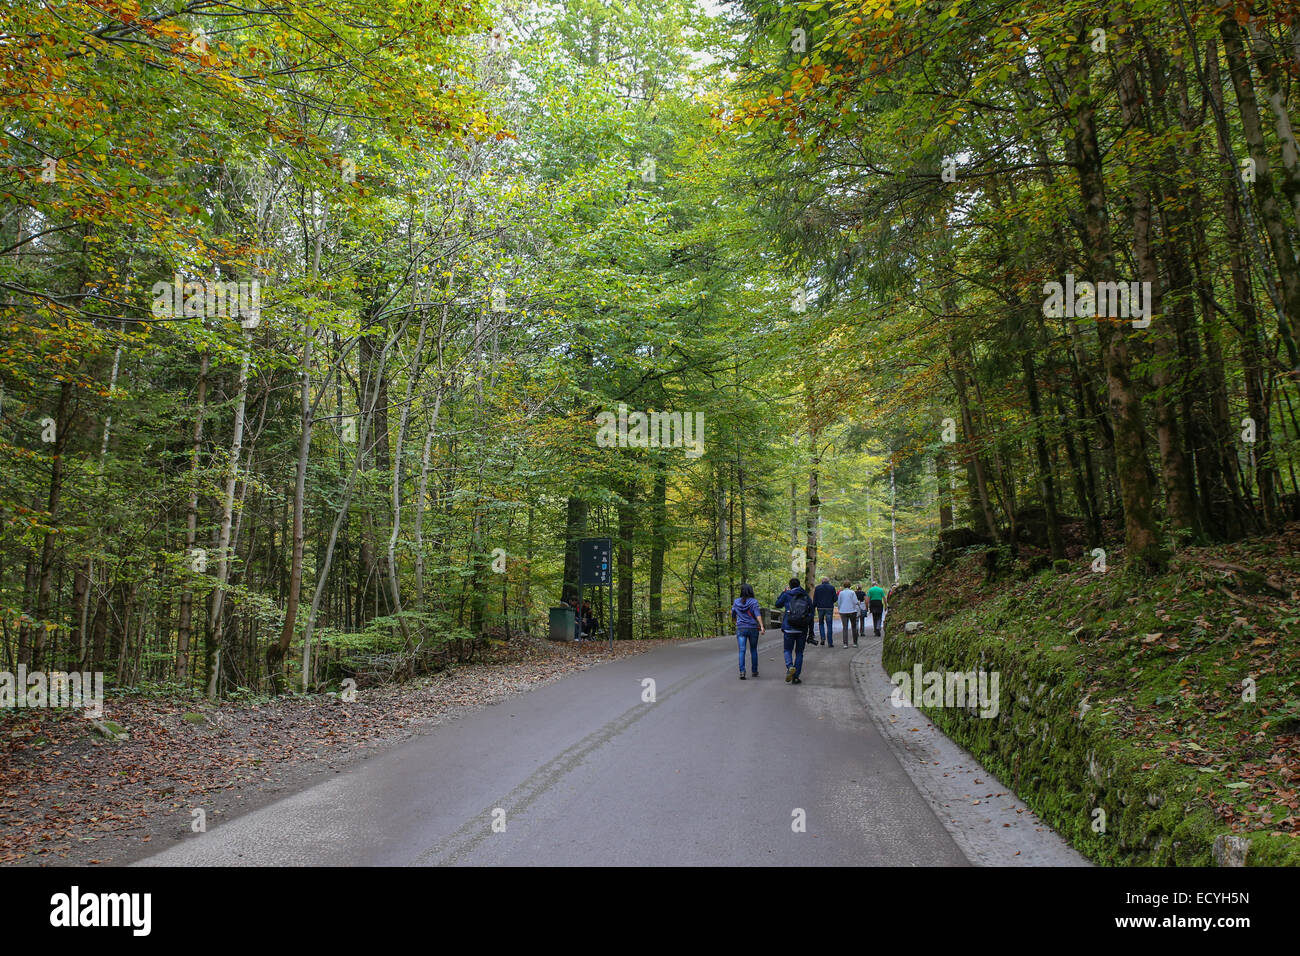 tourists walking pavement outdoor forest Stock Photo